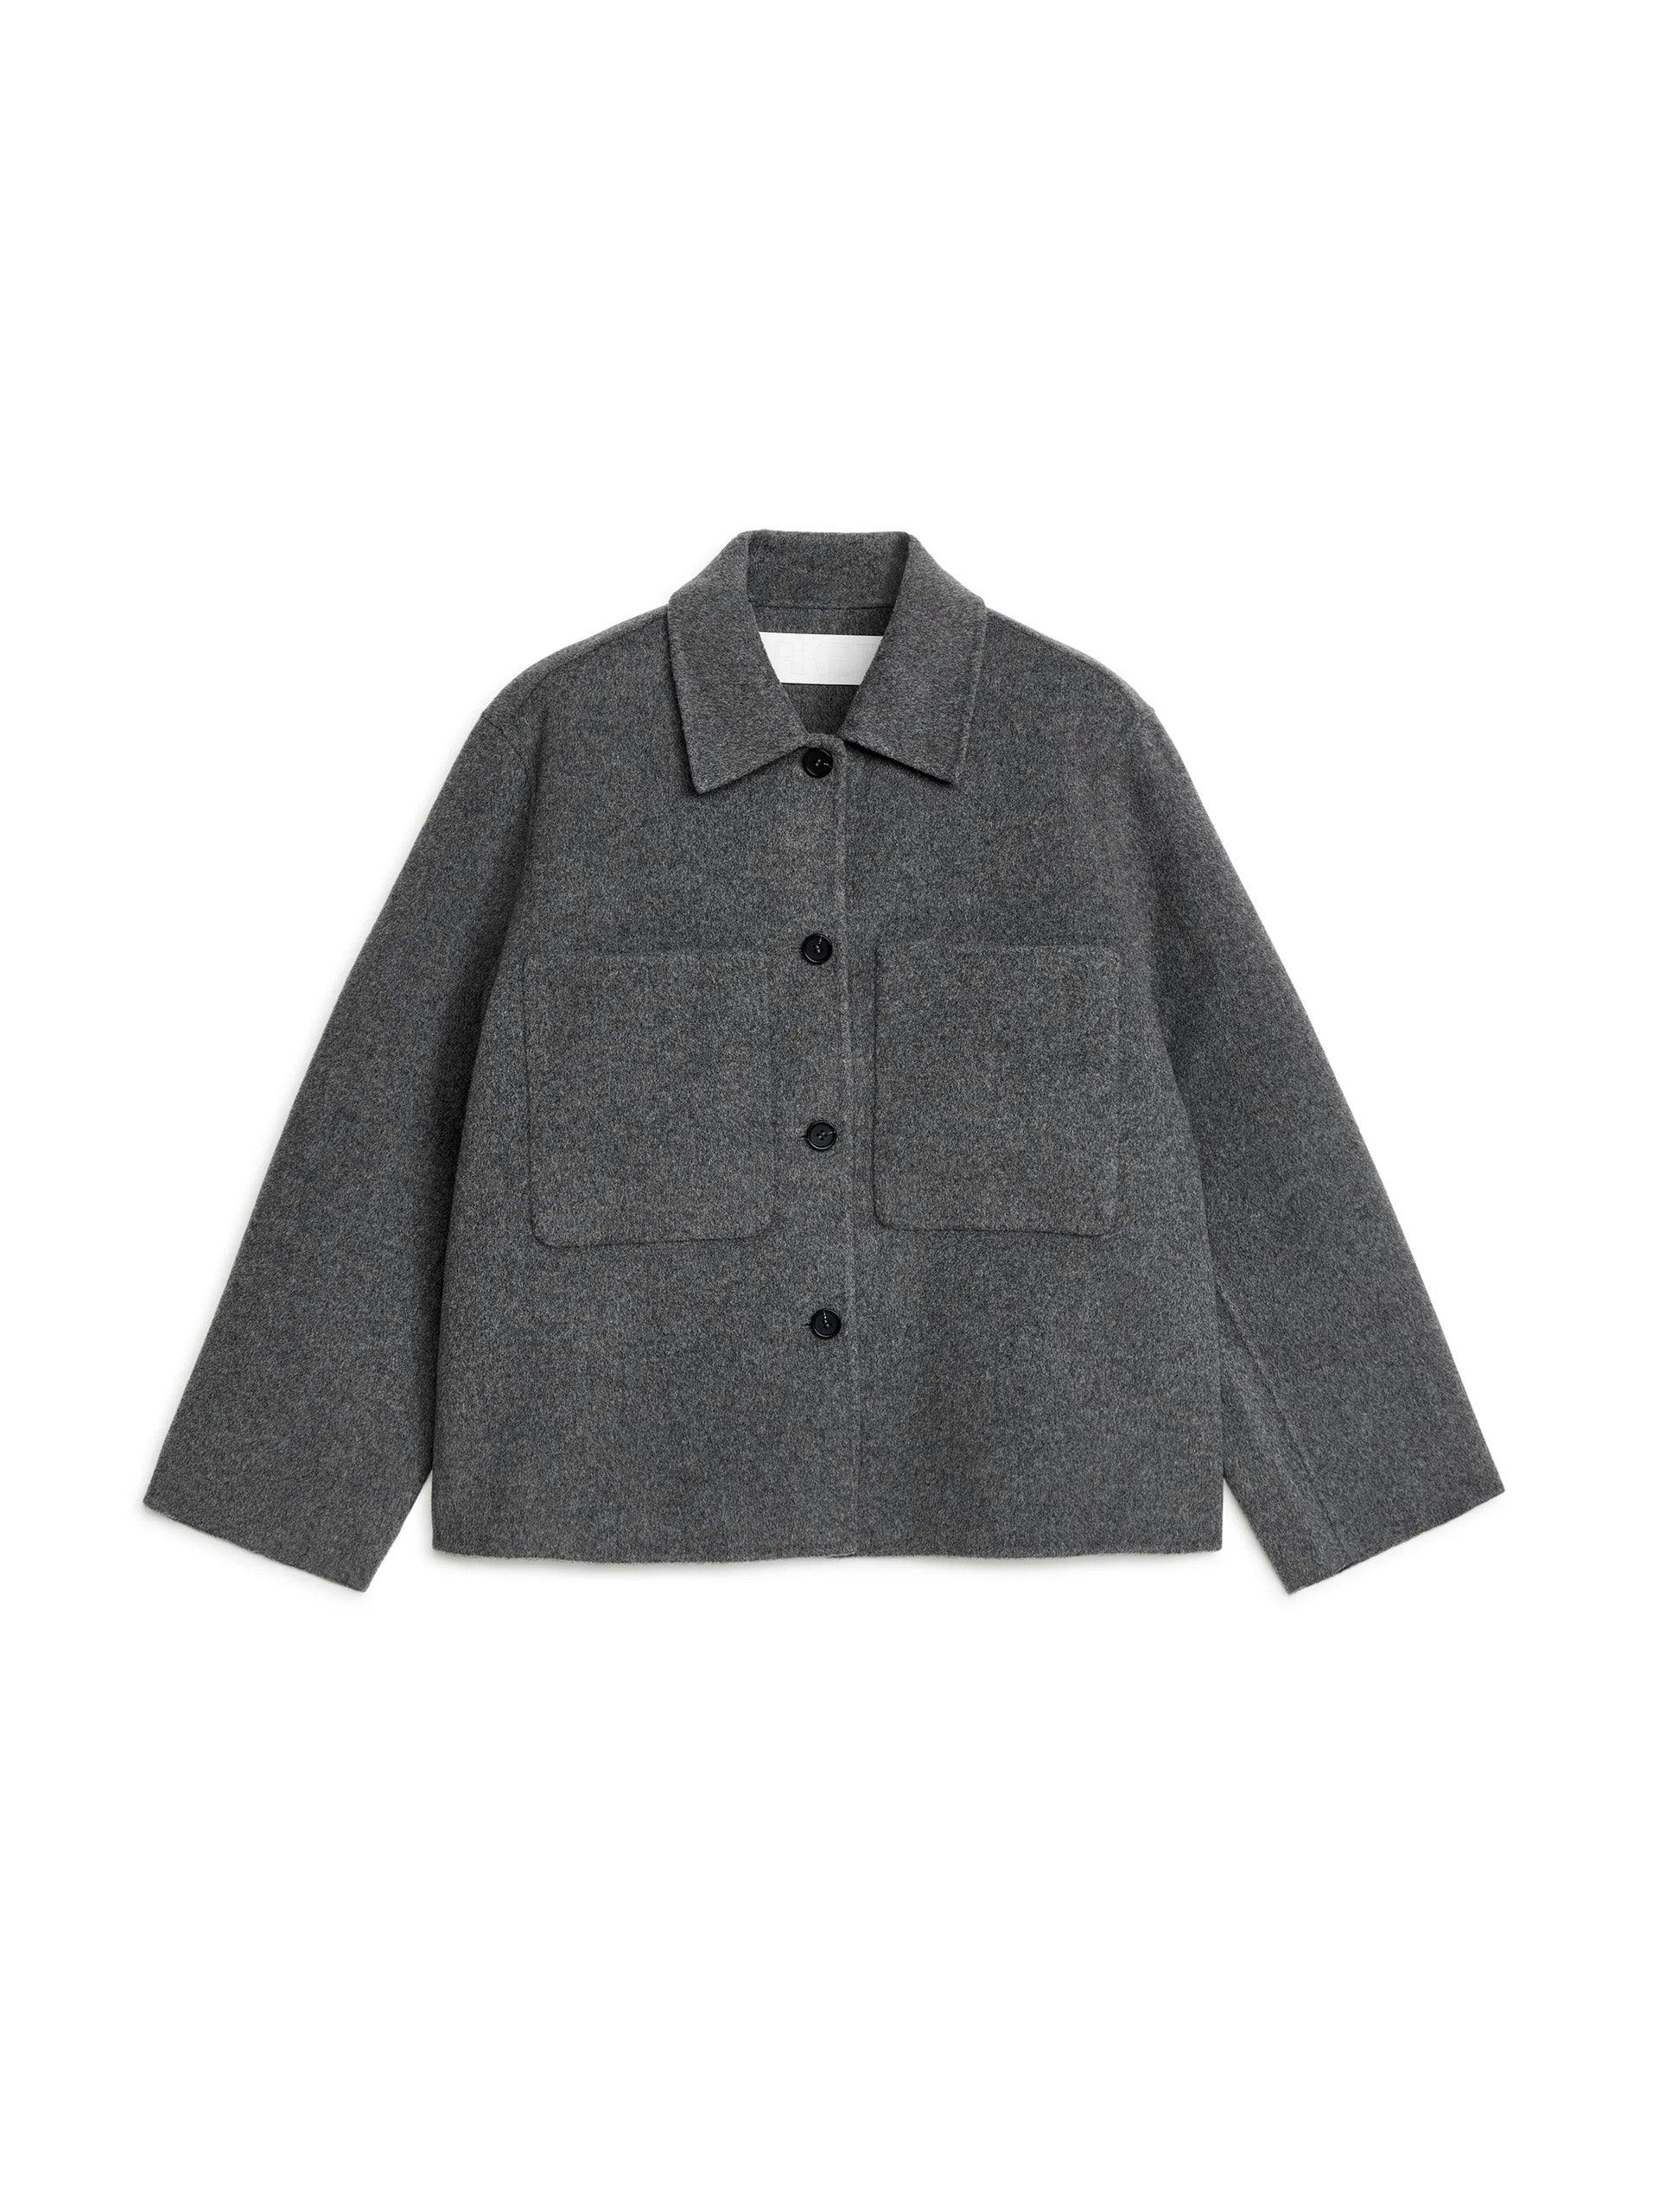 Double-face wool grey overshirt